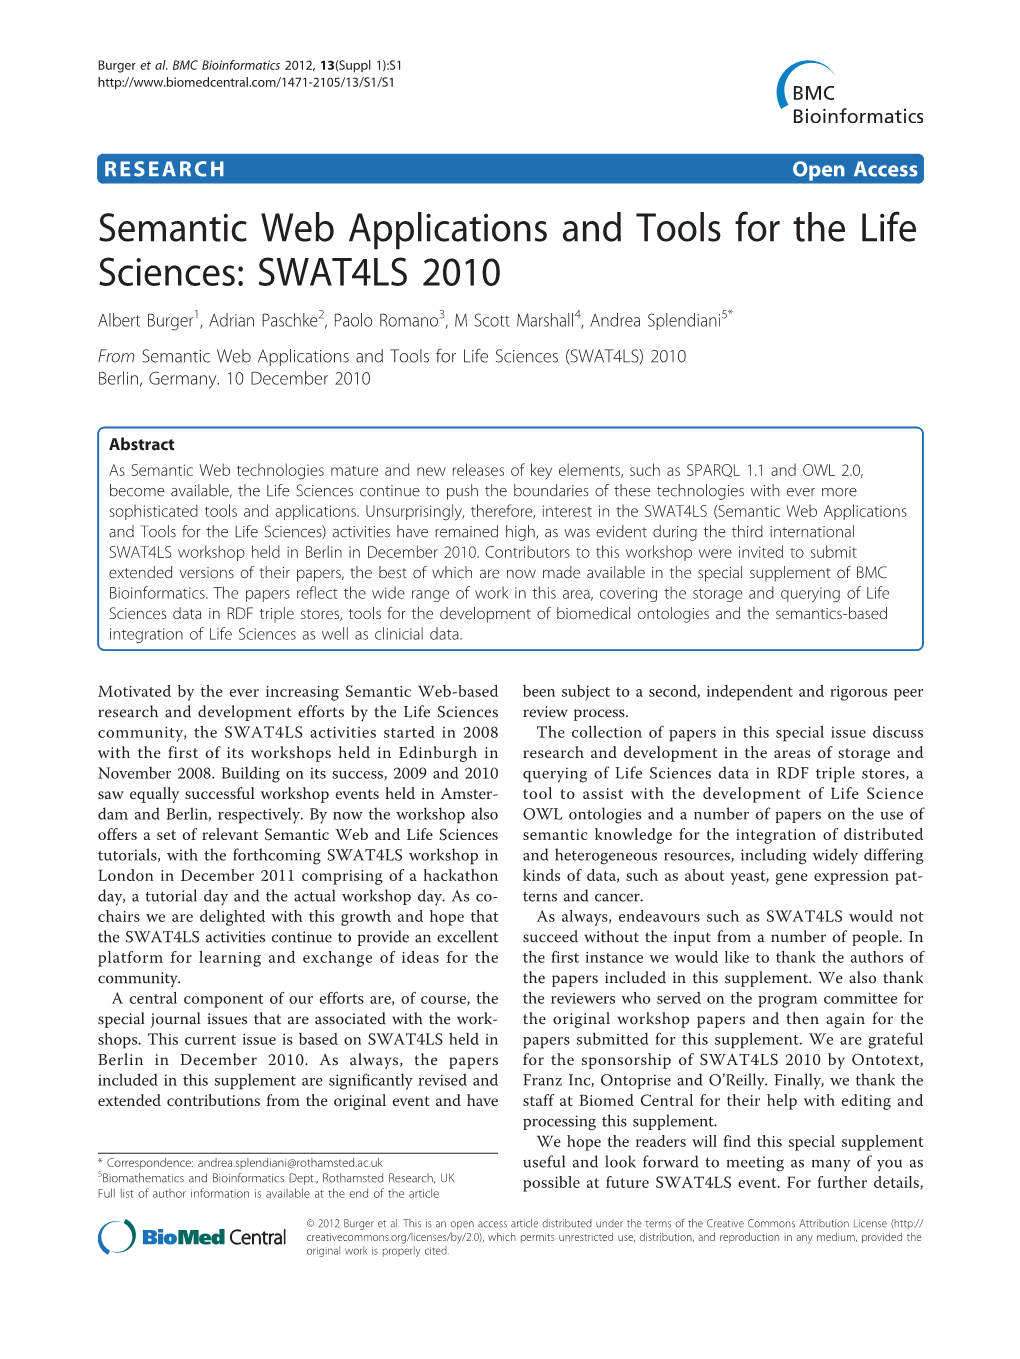 Semantic Web Applications and Tools for the Life Sciences: SWAT4LS 2010